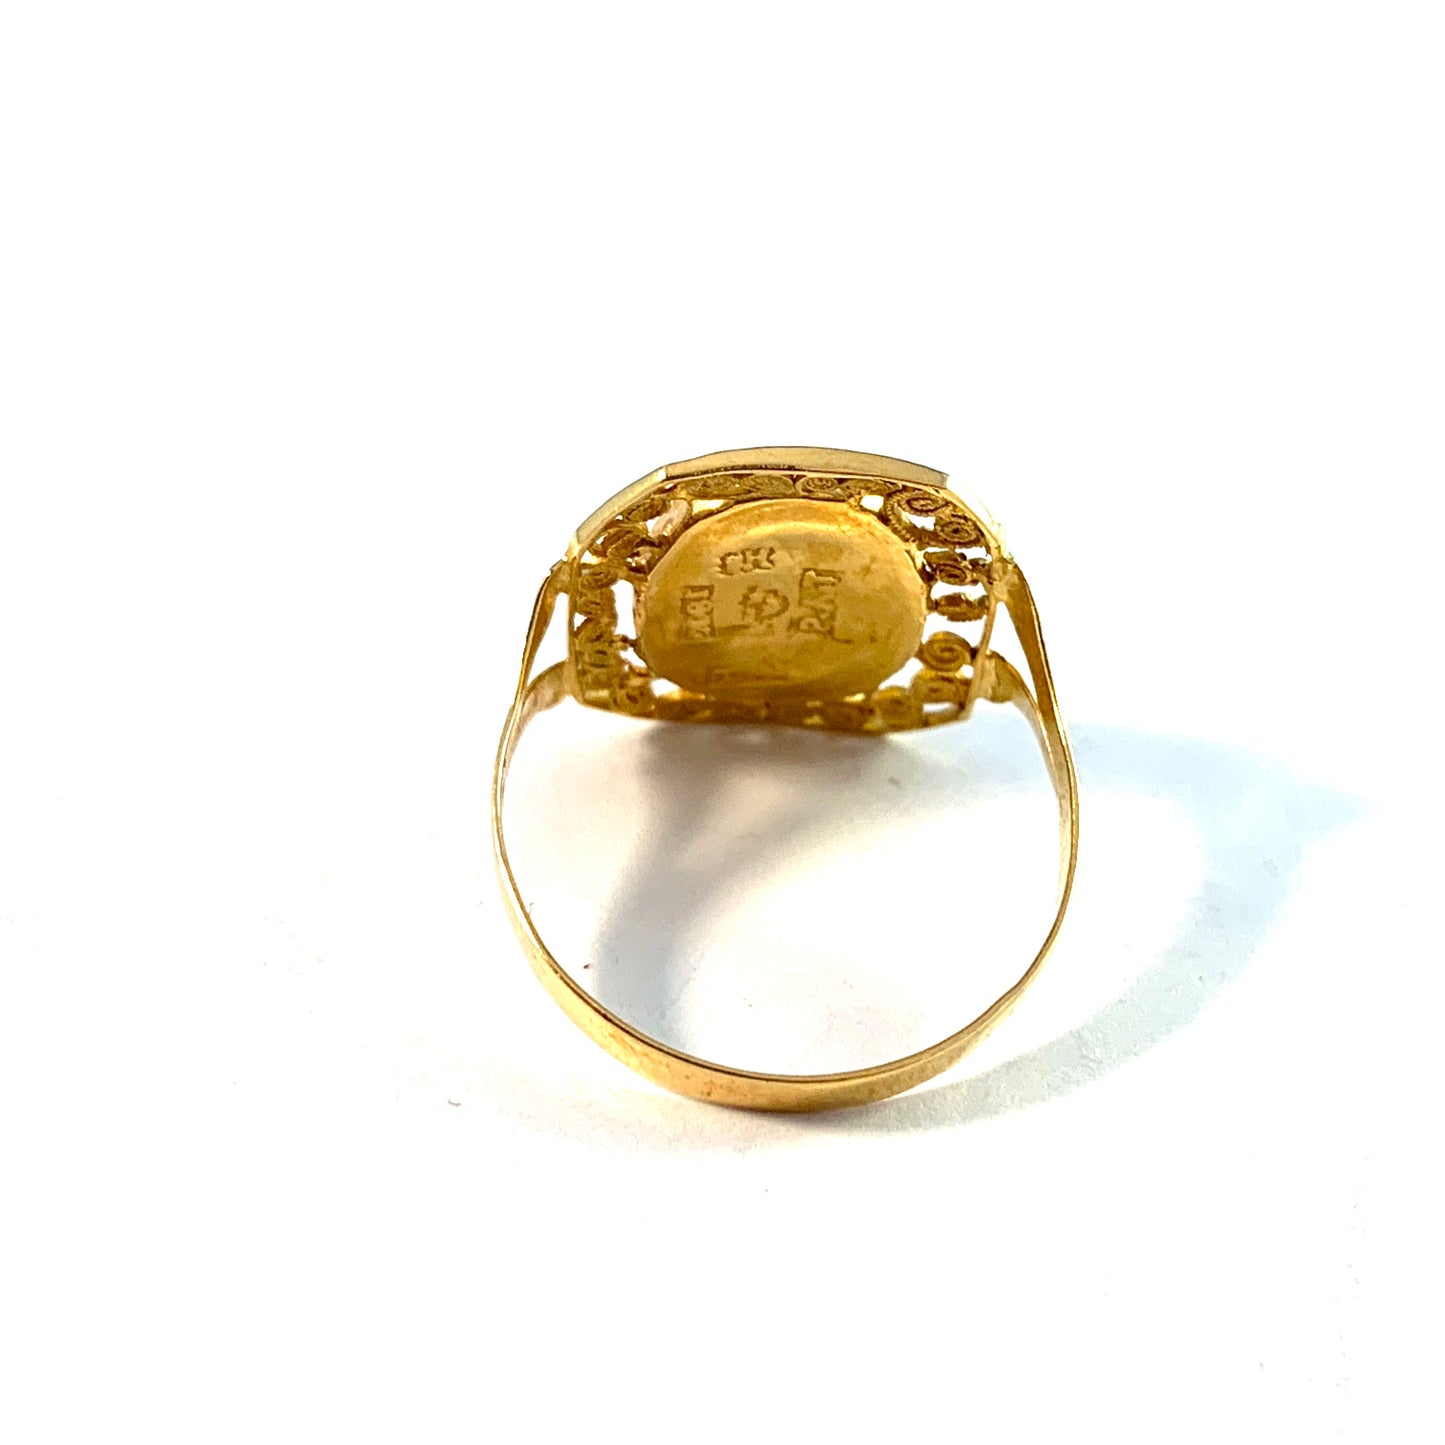 P A Thomason, Sweden 1849. Antique Reversed Painted Glass Ring.